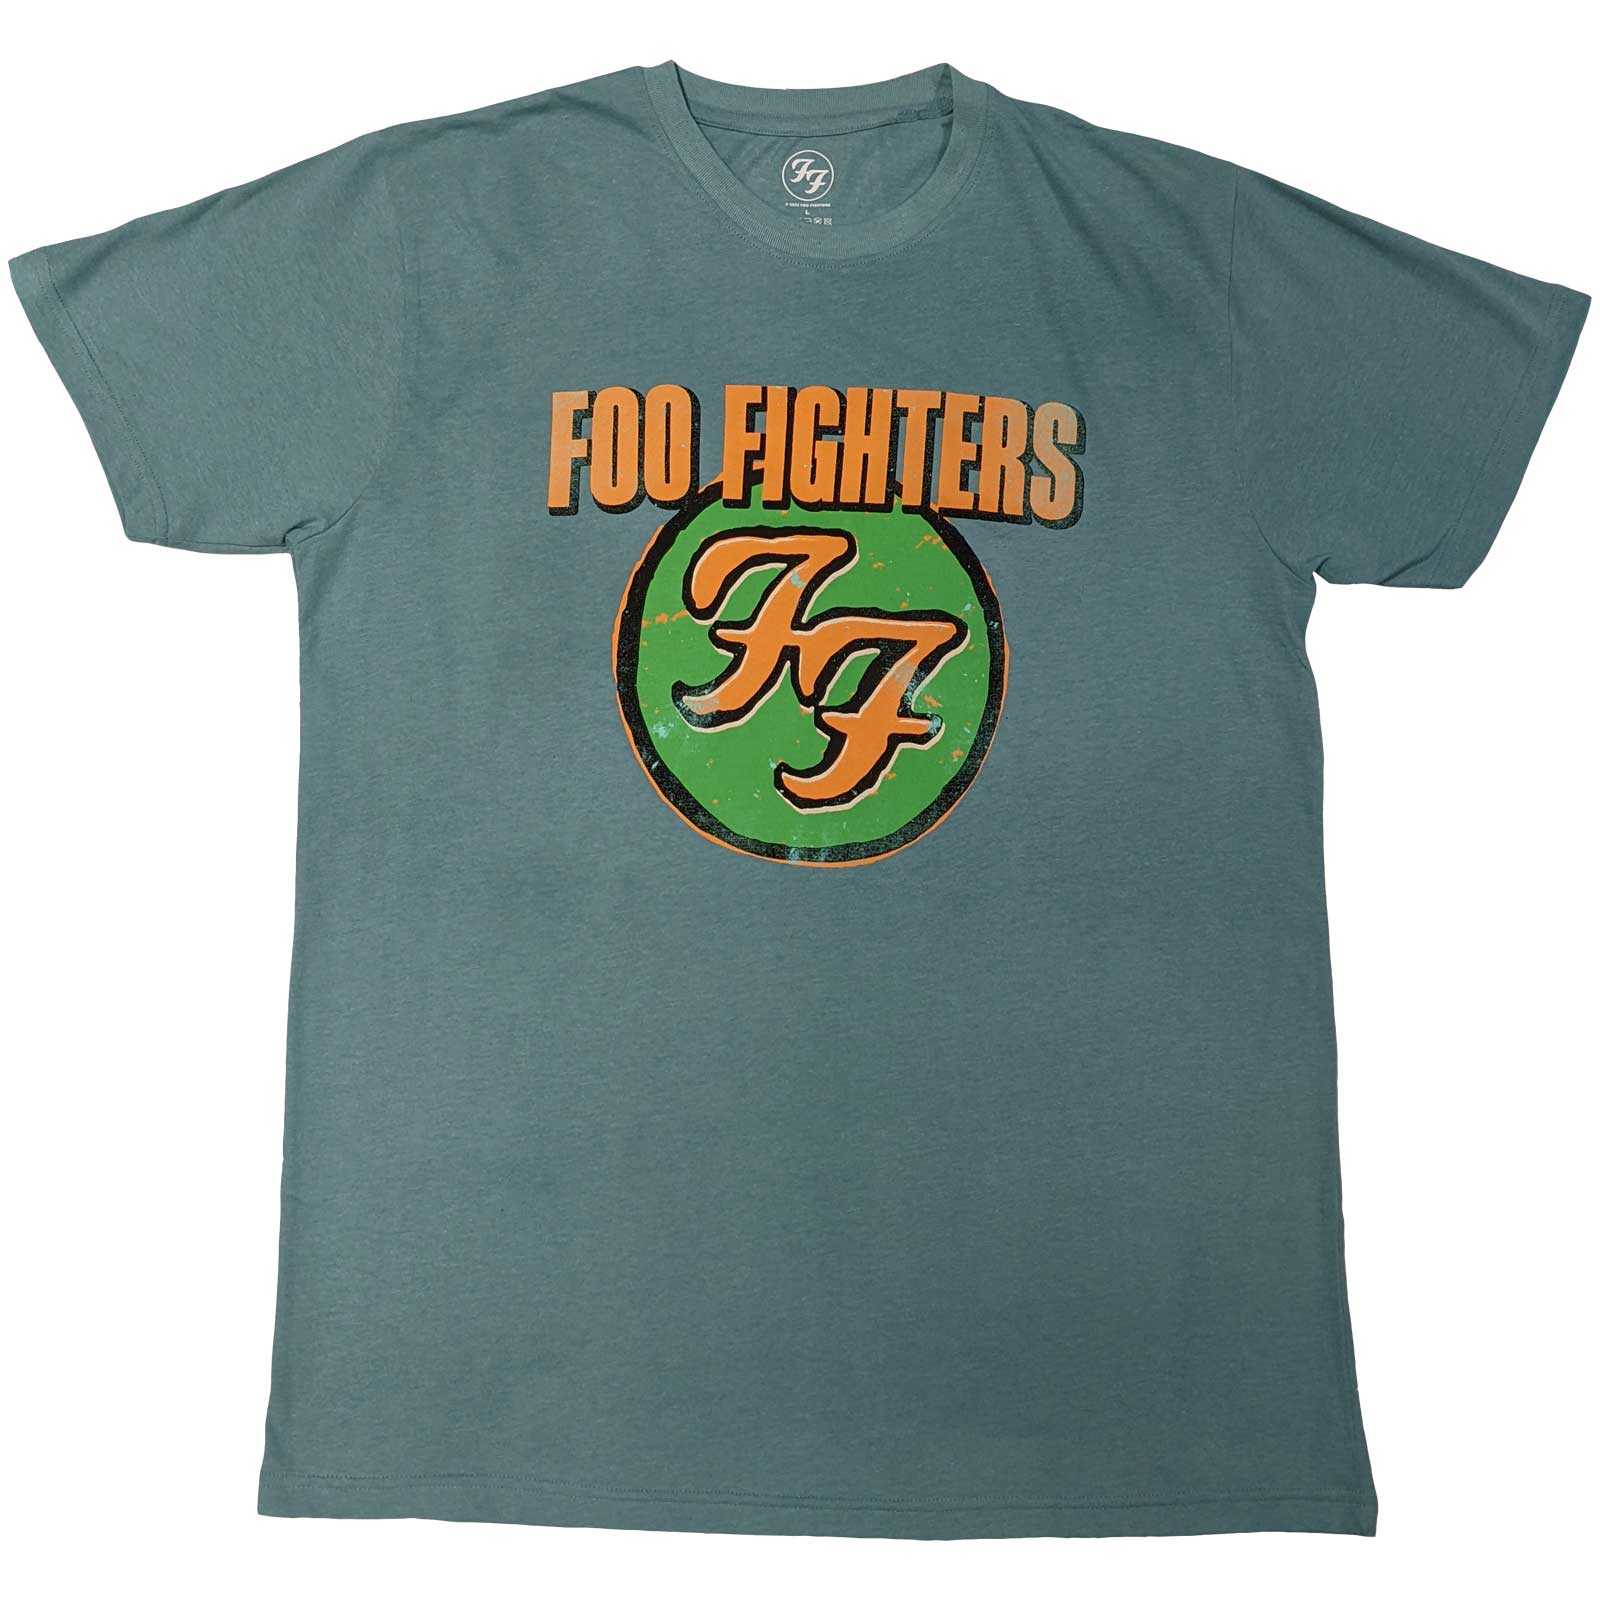 Foo Fighters T-Shirt - Graff (Eco Friendly) - Unisex Official Licensed Design - Jelly Frog